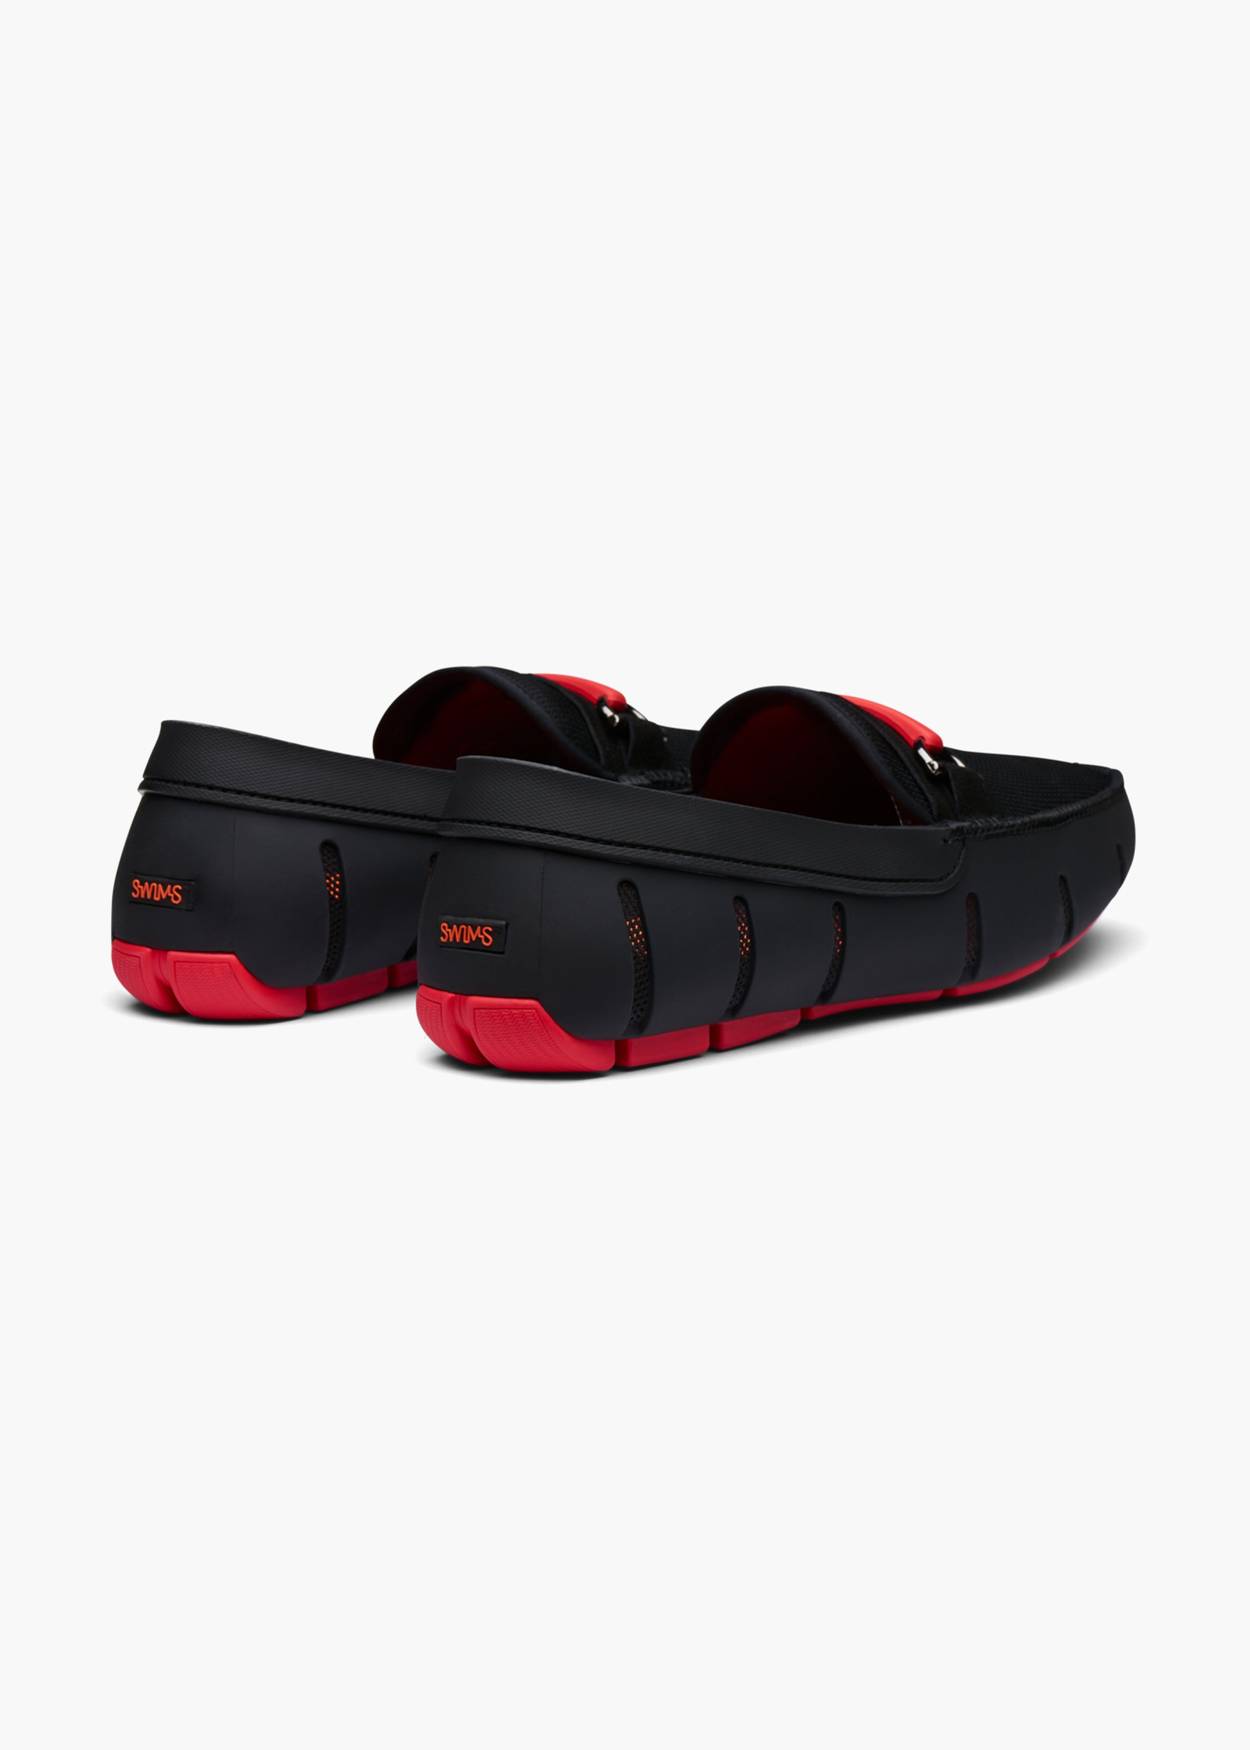 The Sporty Bit Loafer